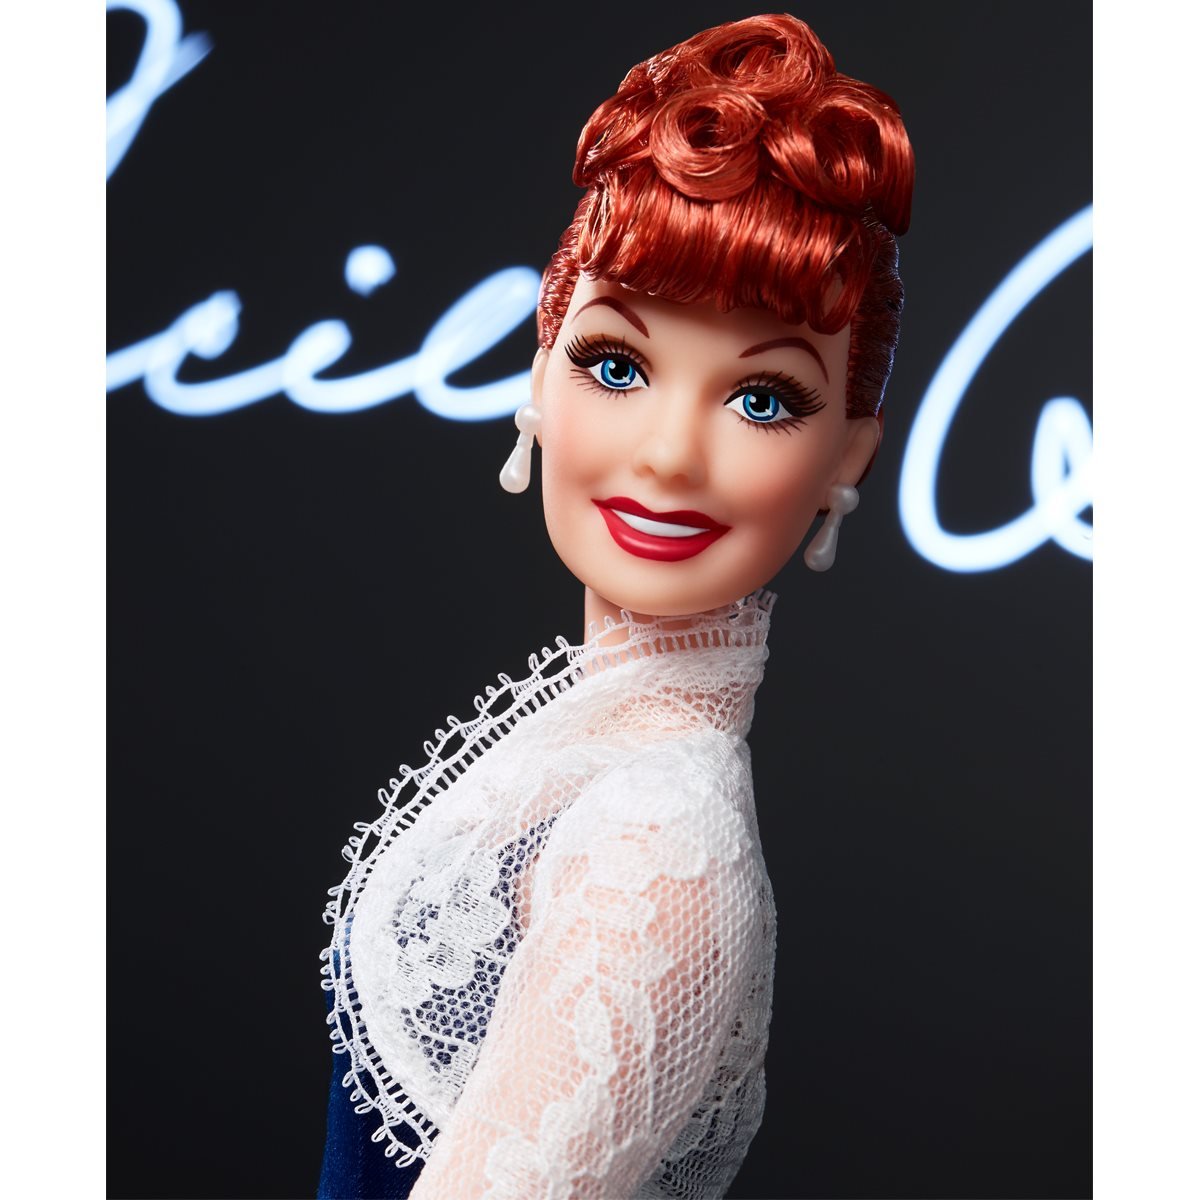 Lucille Ball Barbie Tribute Collection Doll – Mattel Creations